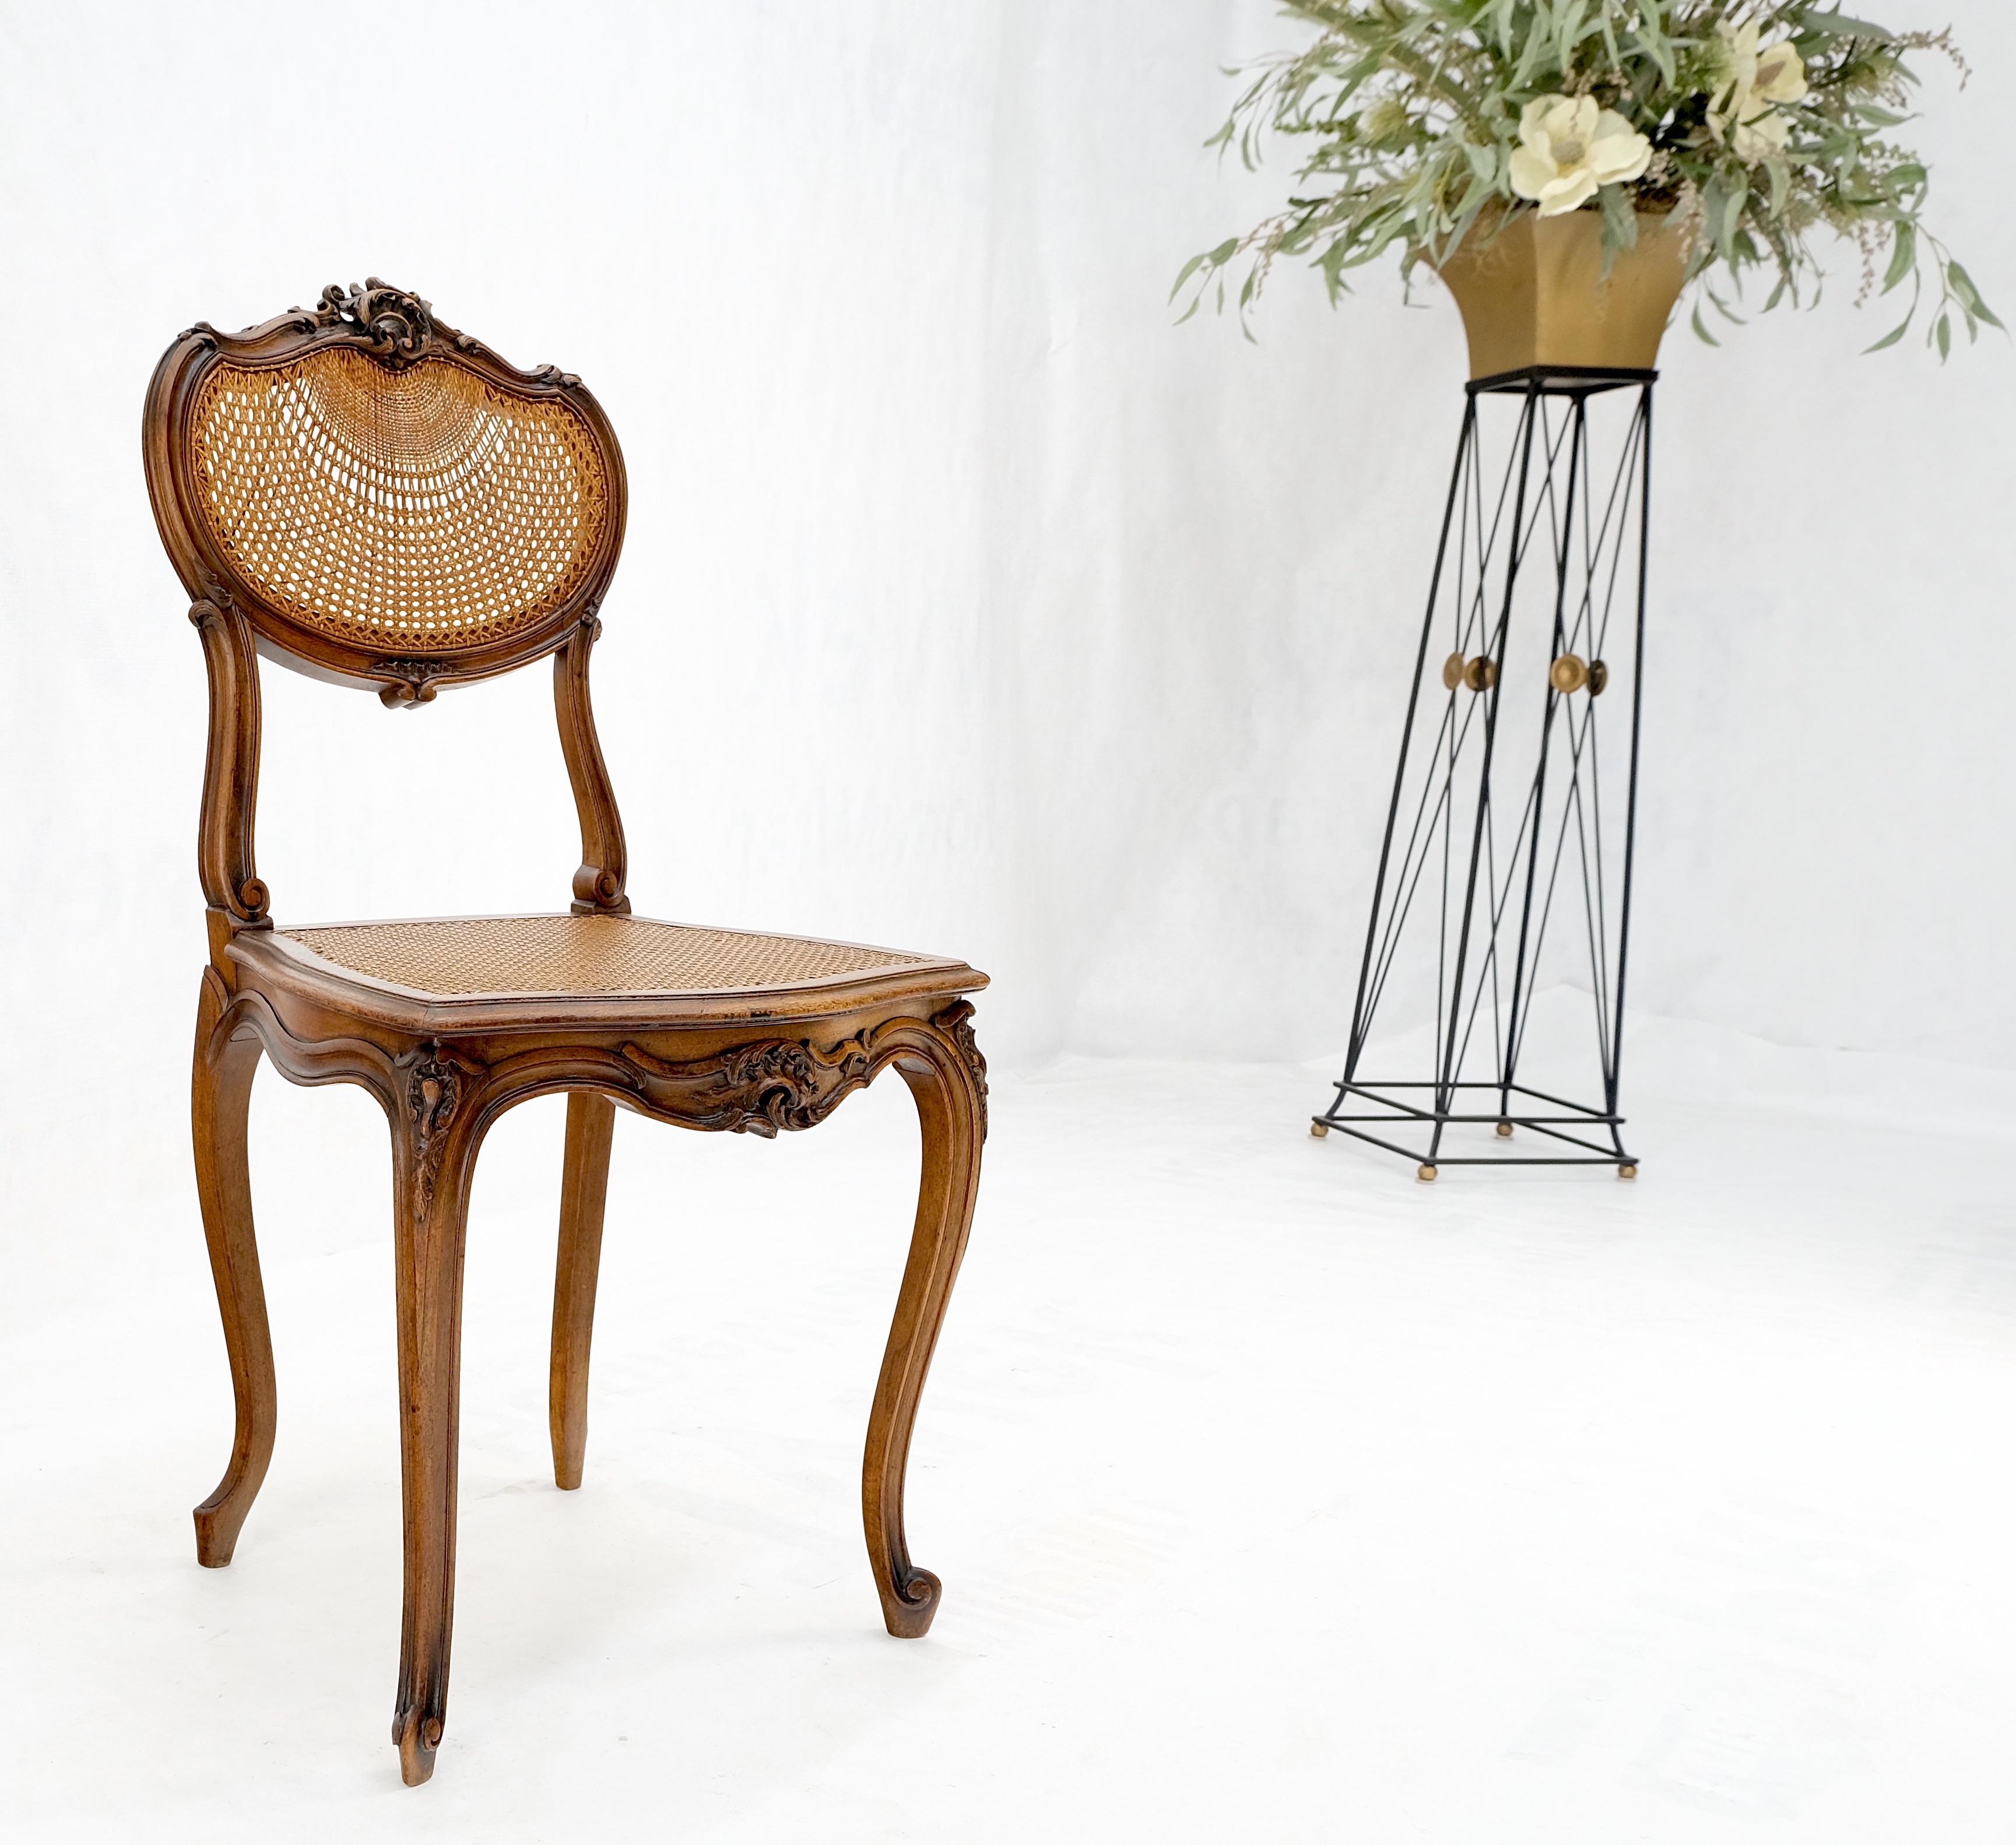 Fine Carved Walnut Cane Seat & Back French Vanity Dressing Table Chair MINT! 1